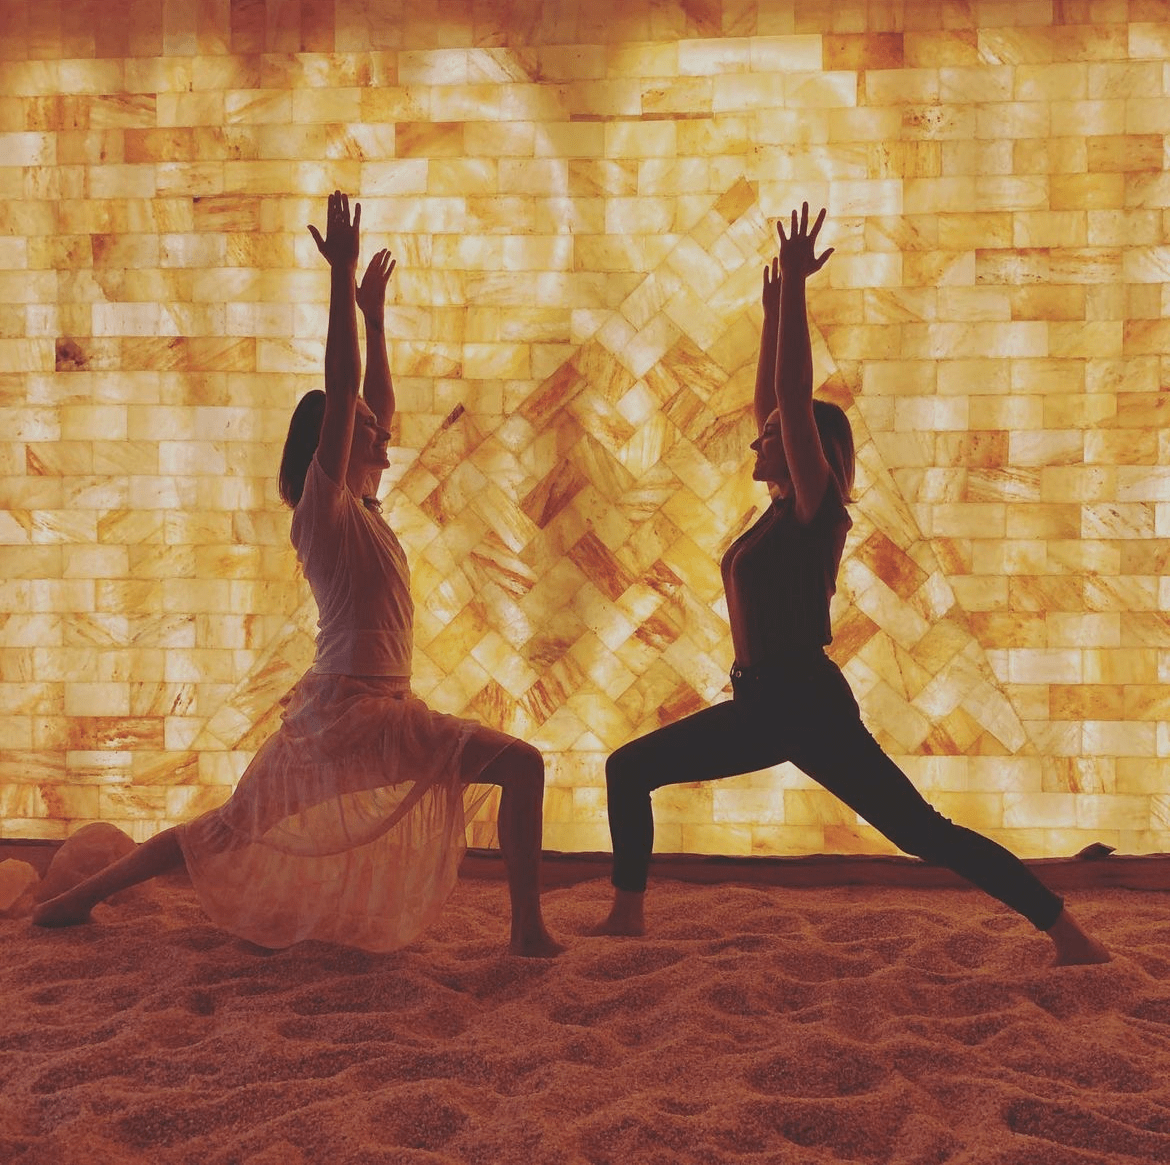 Two Women Doing Yoga In A Salt Room In Front Of A Himalayan Salt Brick Wall.